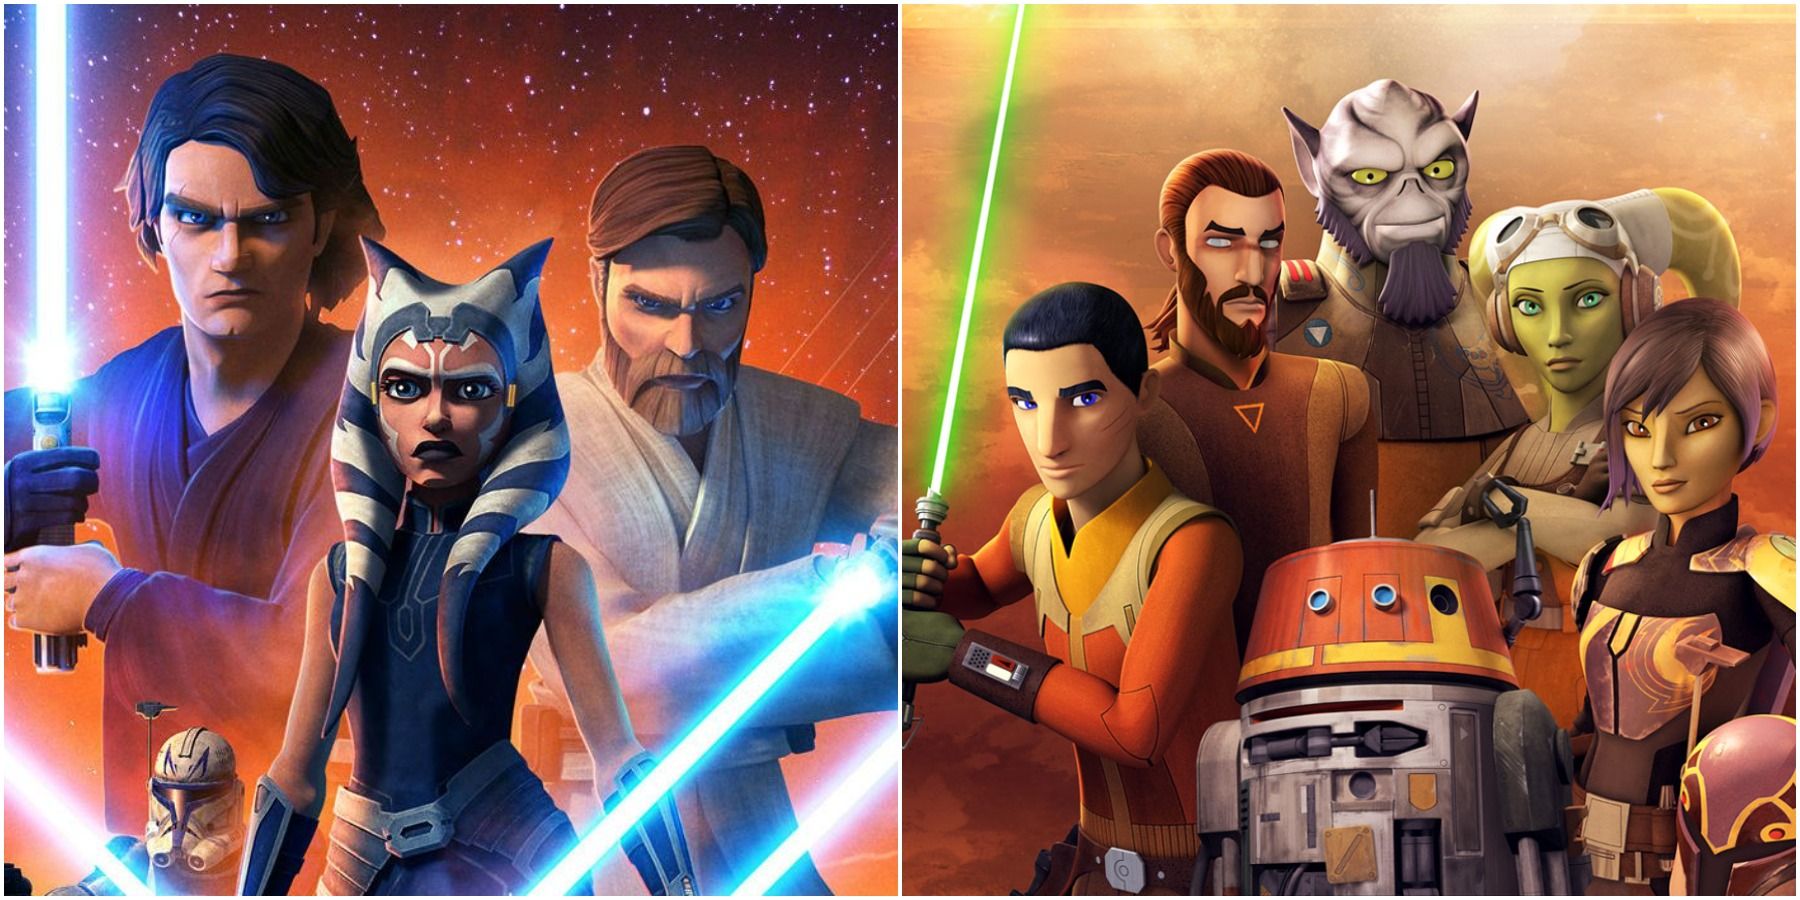 Dave Filoni's The Clone Wars and Rebels animated Star Wars series